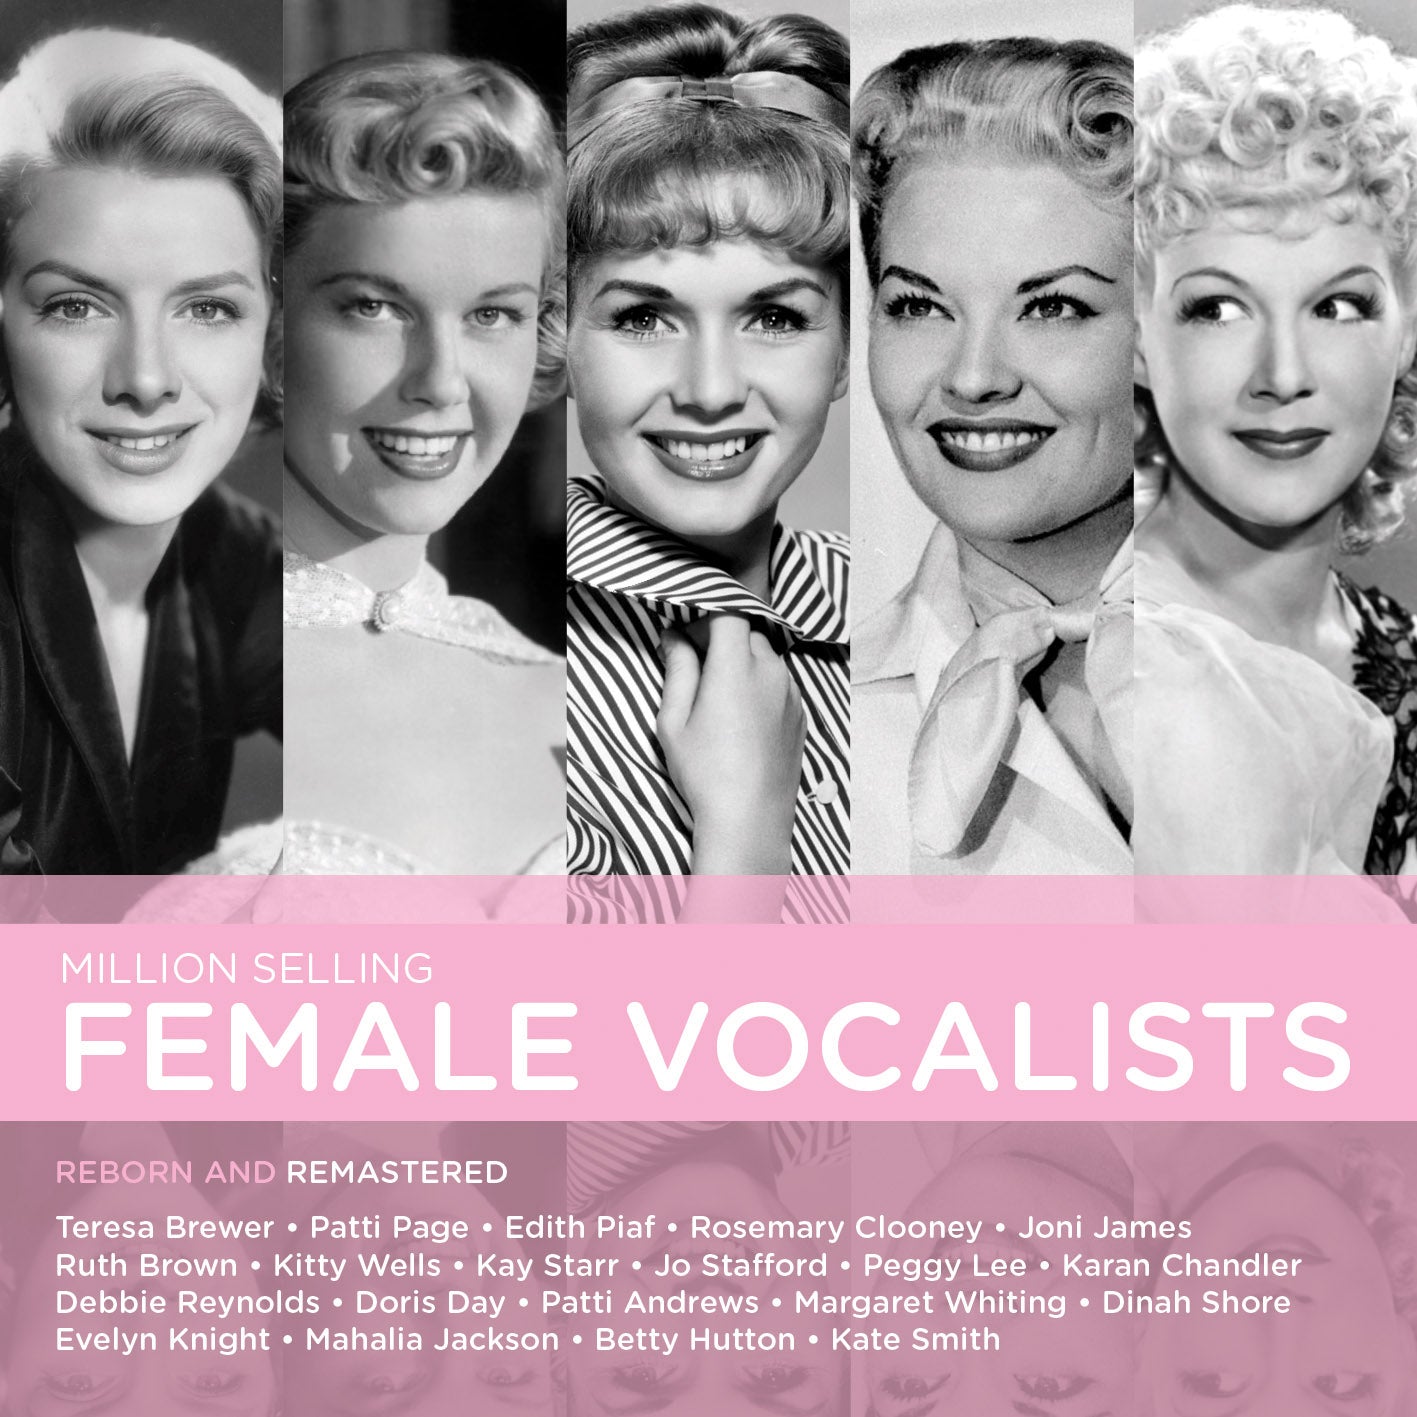 VARIOUS ARTISTS - HALL OF FAME: MILLION SELLING FEMALE VOCALISTS